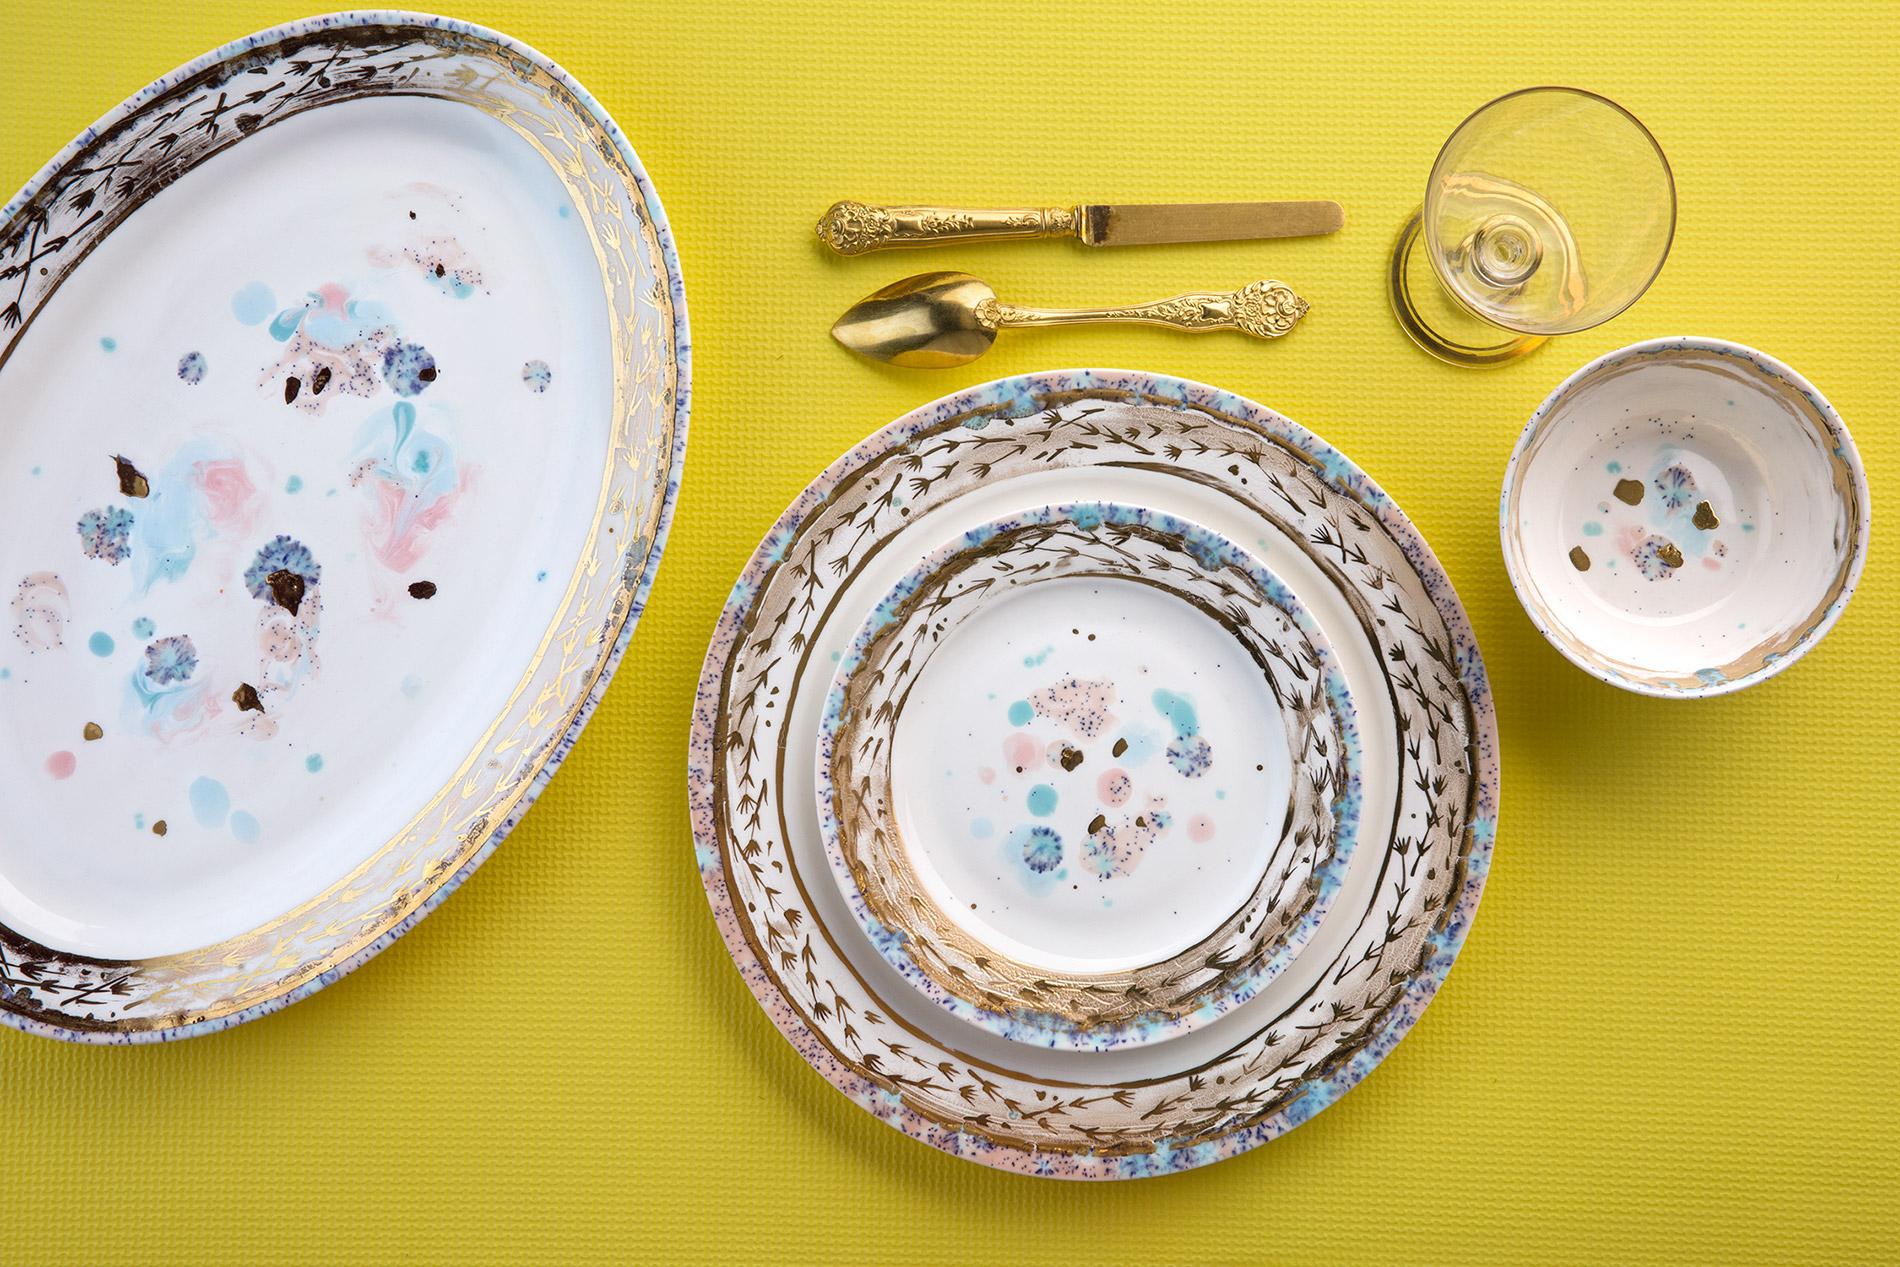 Hand painted in Italy from the finest porcelain, this medium-sized Dafne Oval Rim Platter has a narrow pink and blue dotted rim surrounding a broad, delicate golden decor of stylised flowers; subtle light blue and pink brushes sprinkled with black